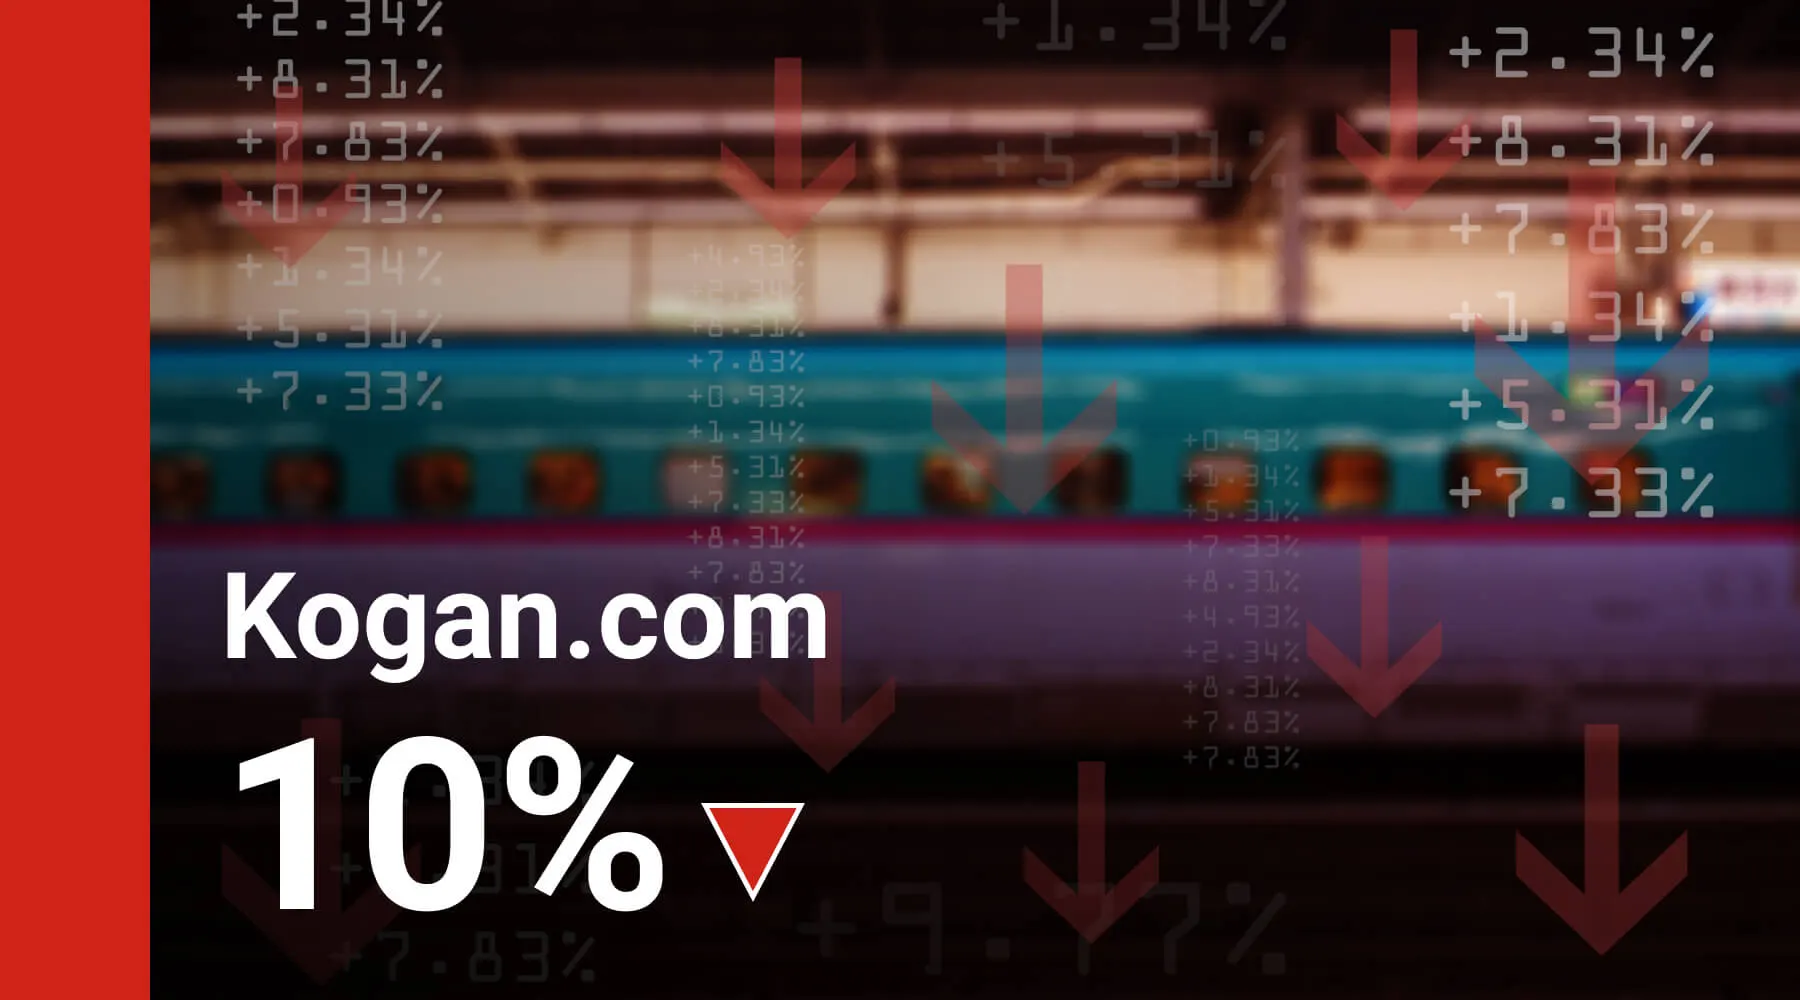 Why is the Kogan share price sliding?